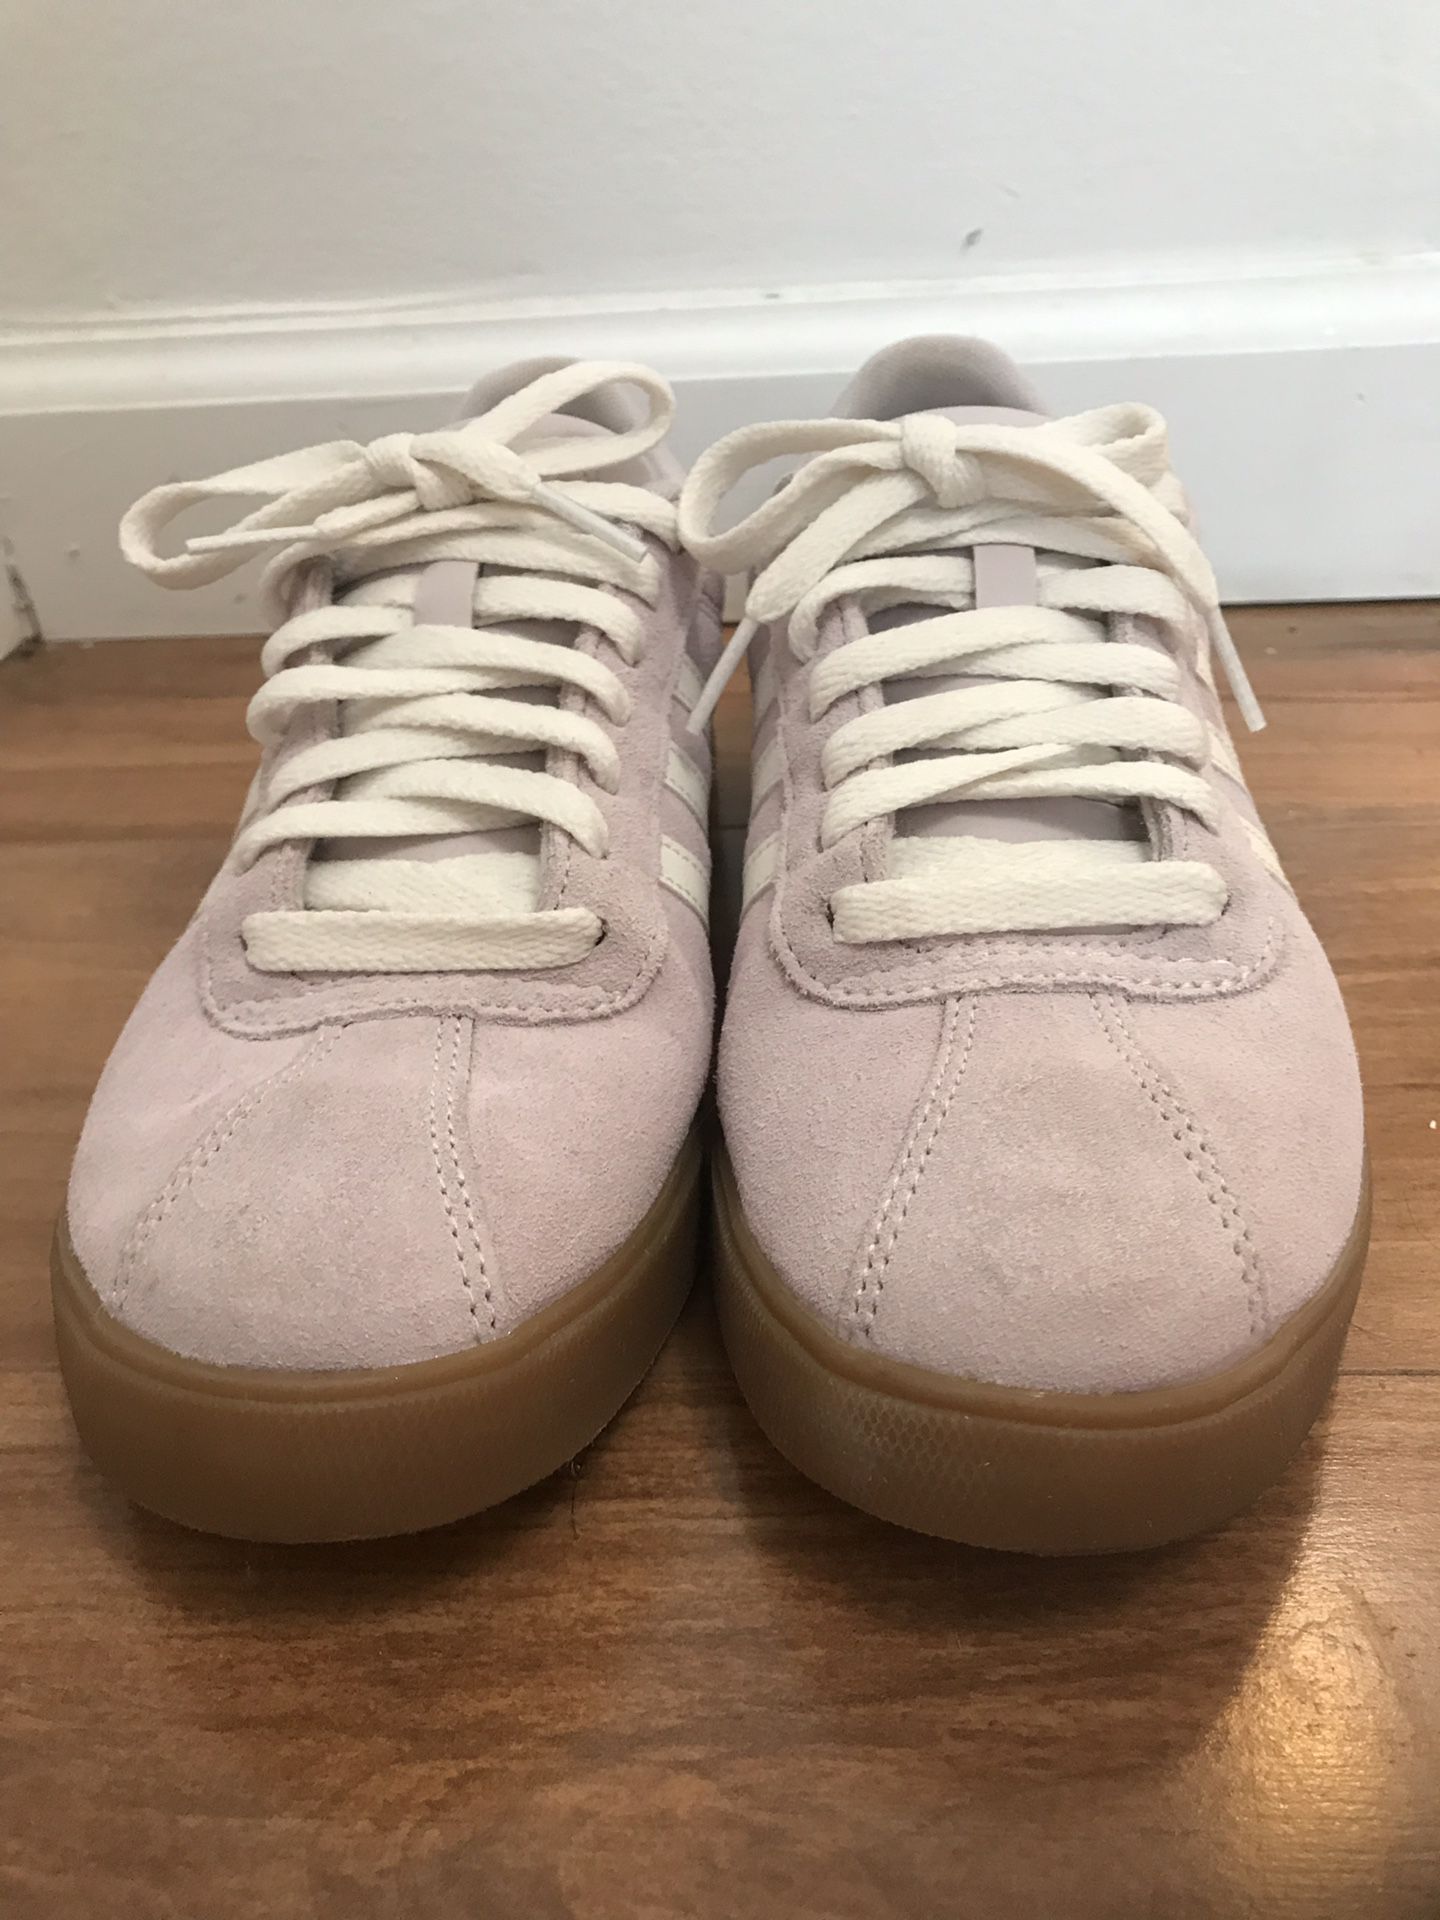 Adidas pink suede sneakers size 7 1/2